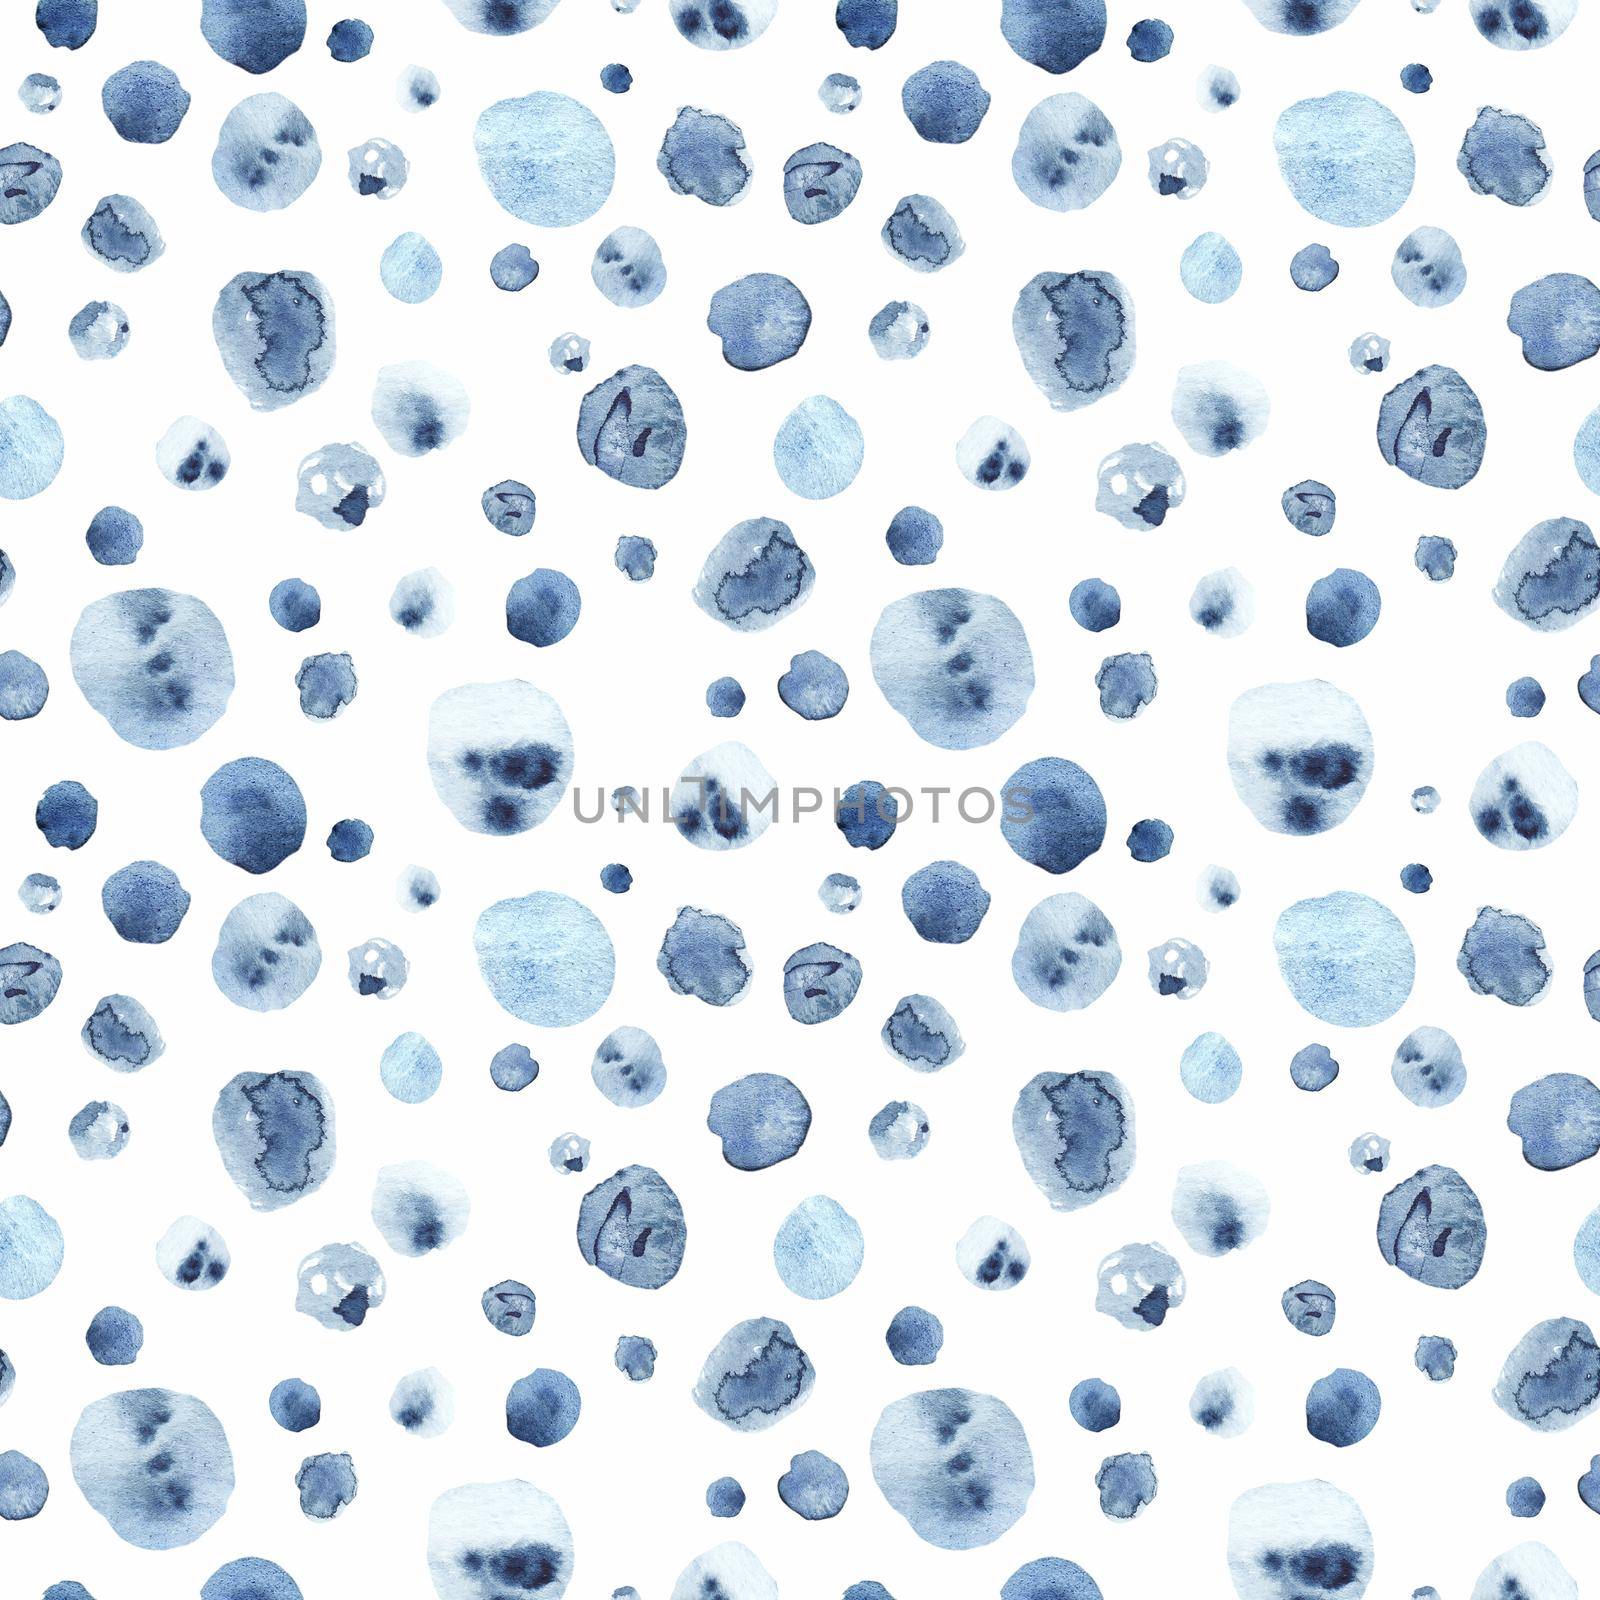 Elegant texture with dots on white background for textile and wallpaper design